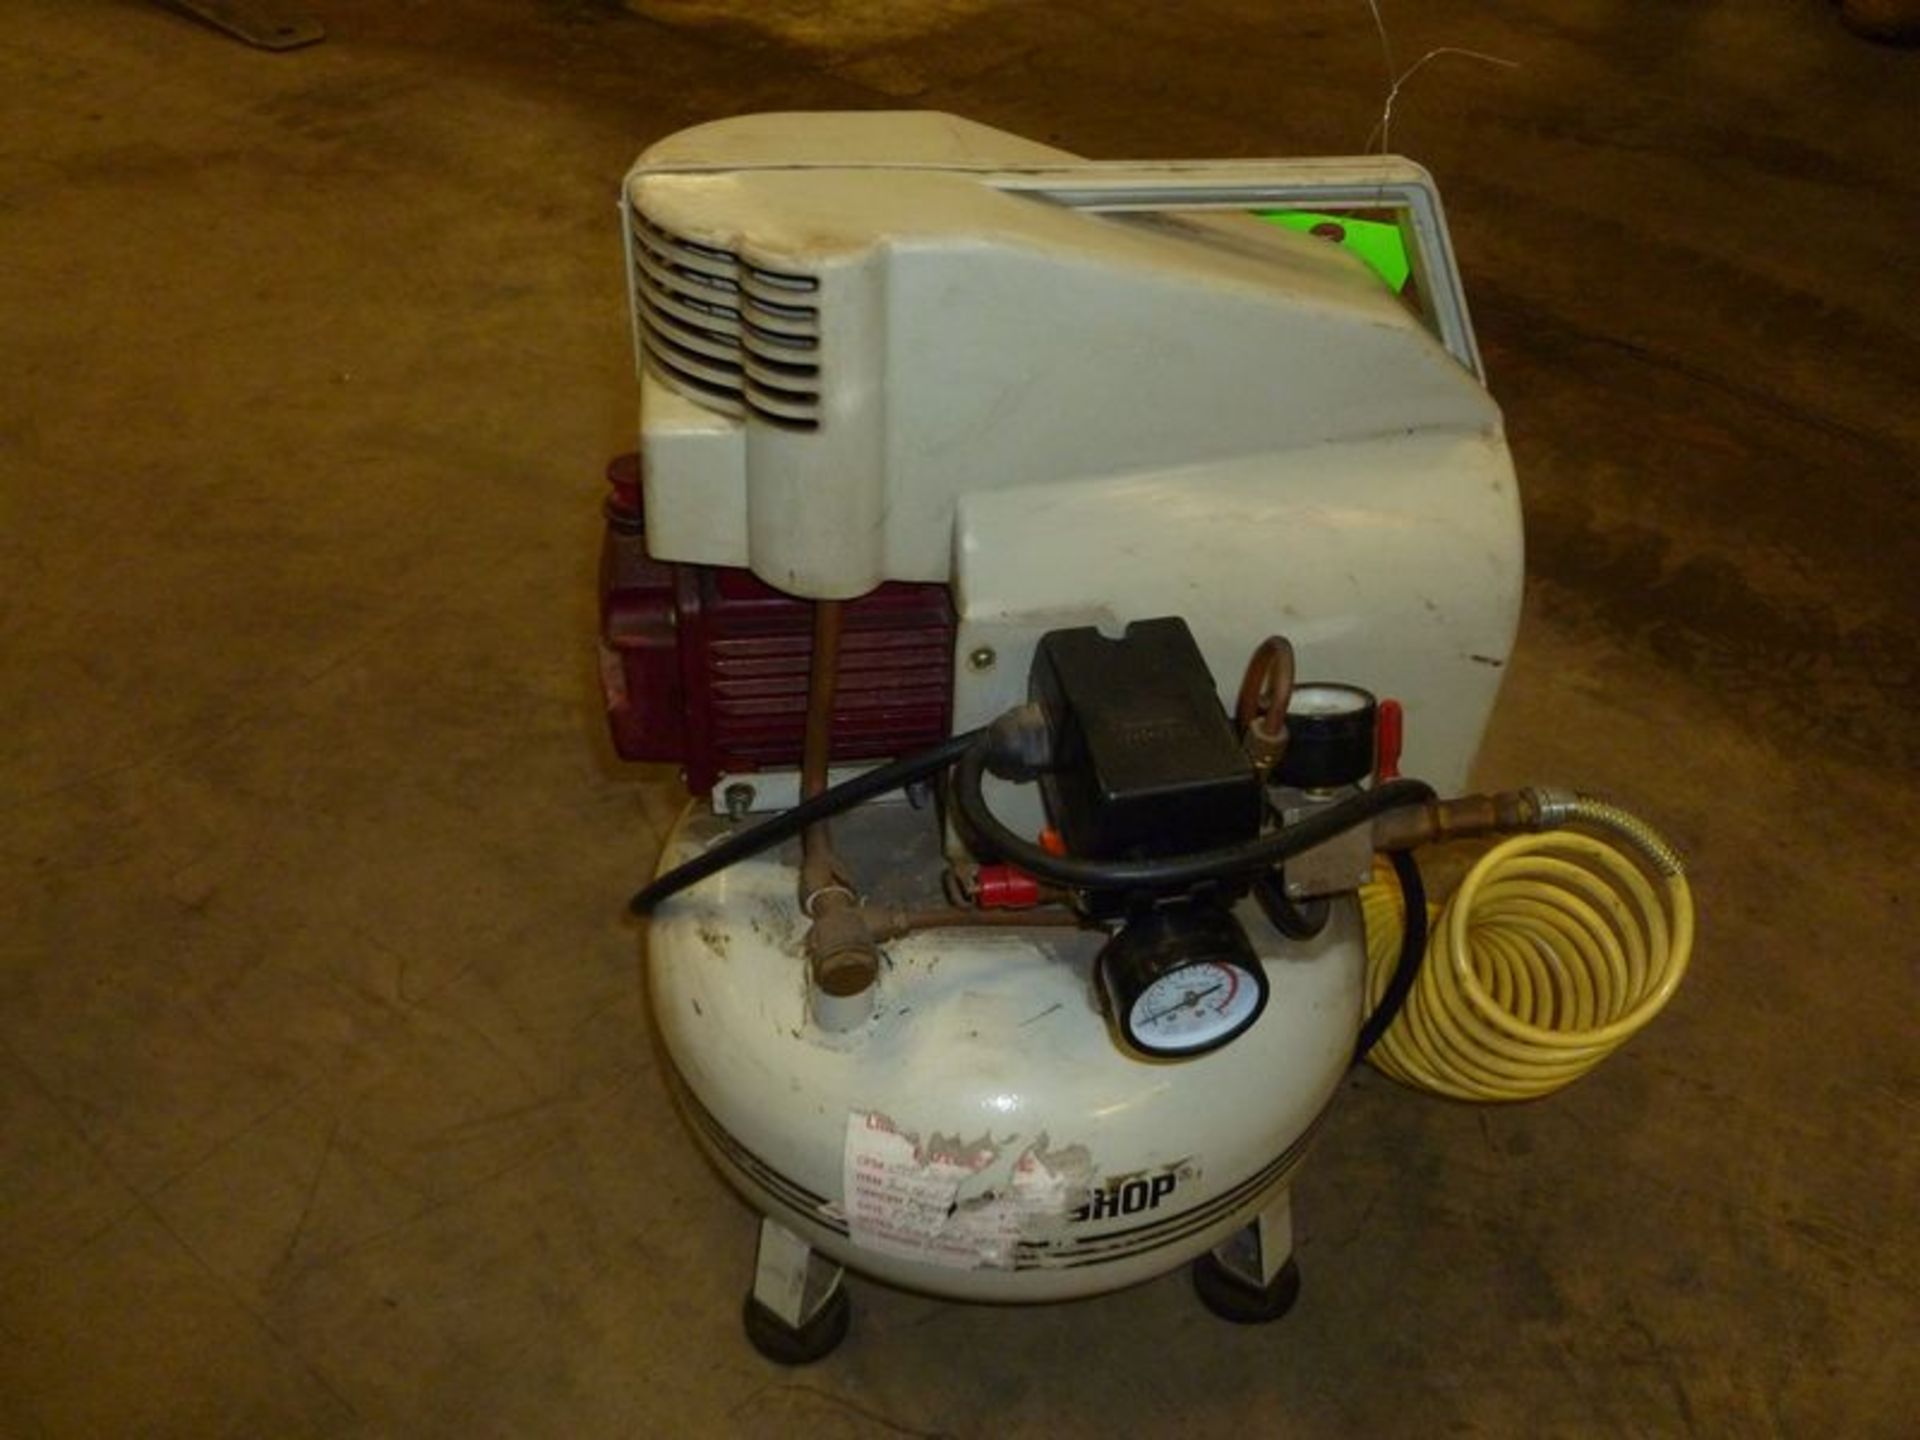 TOOL SHOP PANCAKE AIR COMPRESSOR 2 HP 4 GALLON (LOCATED AT 6901 ARDMORE AVE. FORT WAYNE, IN 46809) - Image 3 of 4